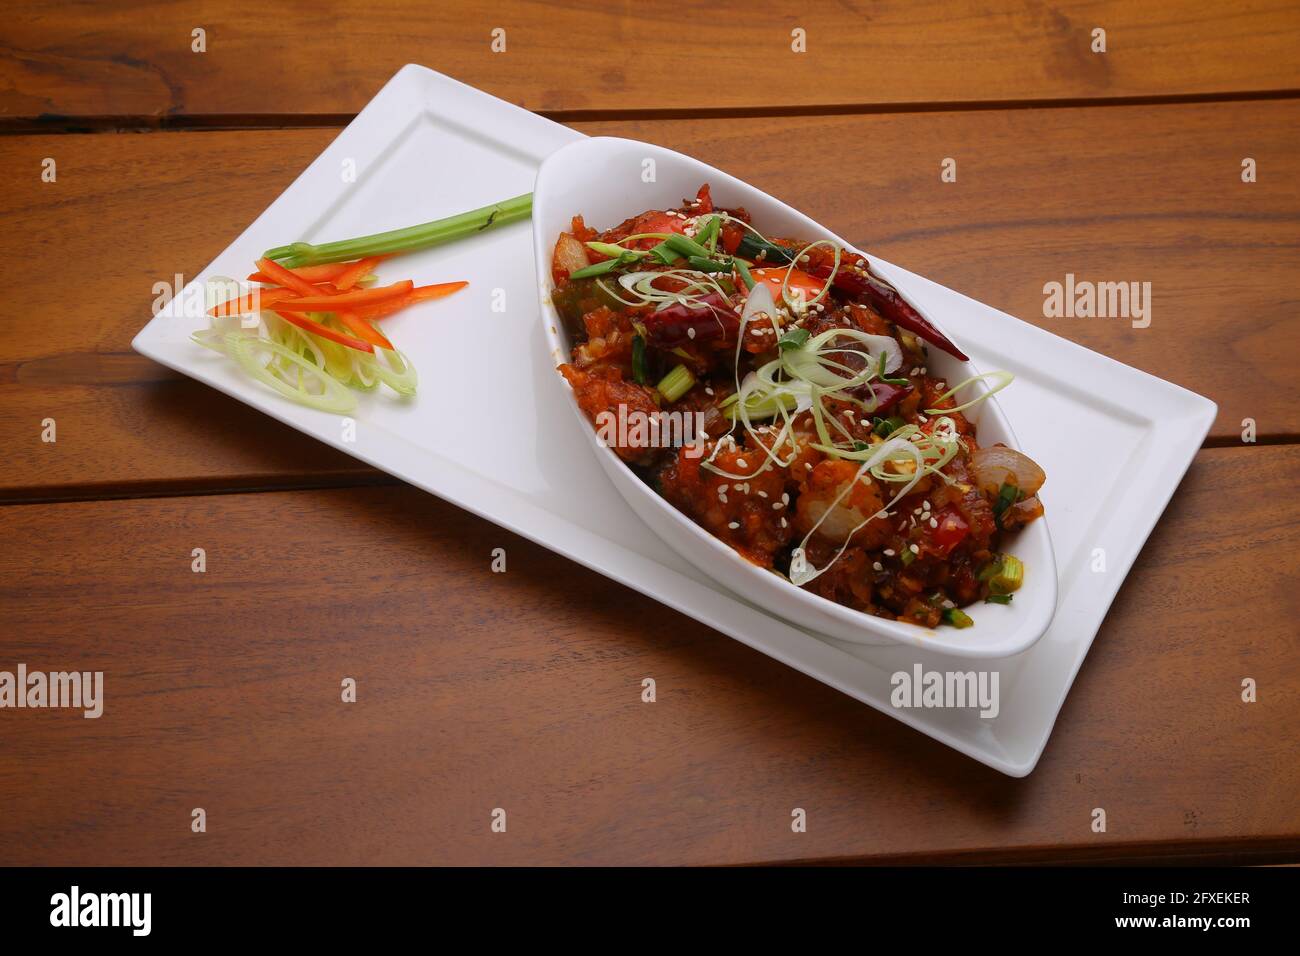 Chilli Chicken dry,well garnished and arranged in an oval shaped bowl on a white serving plate with wooden texture Stock Photo